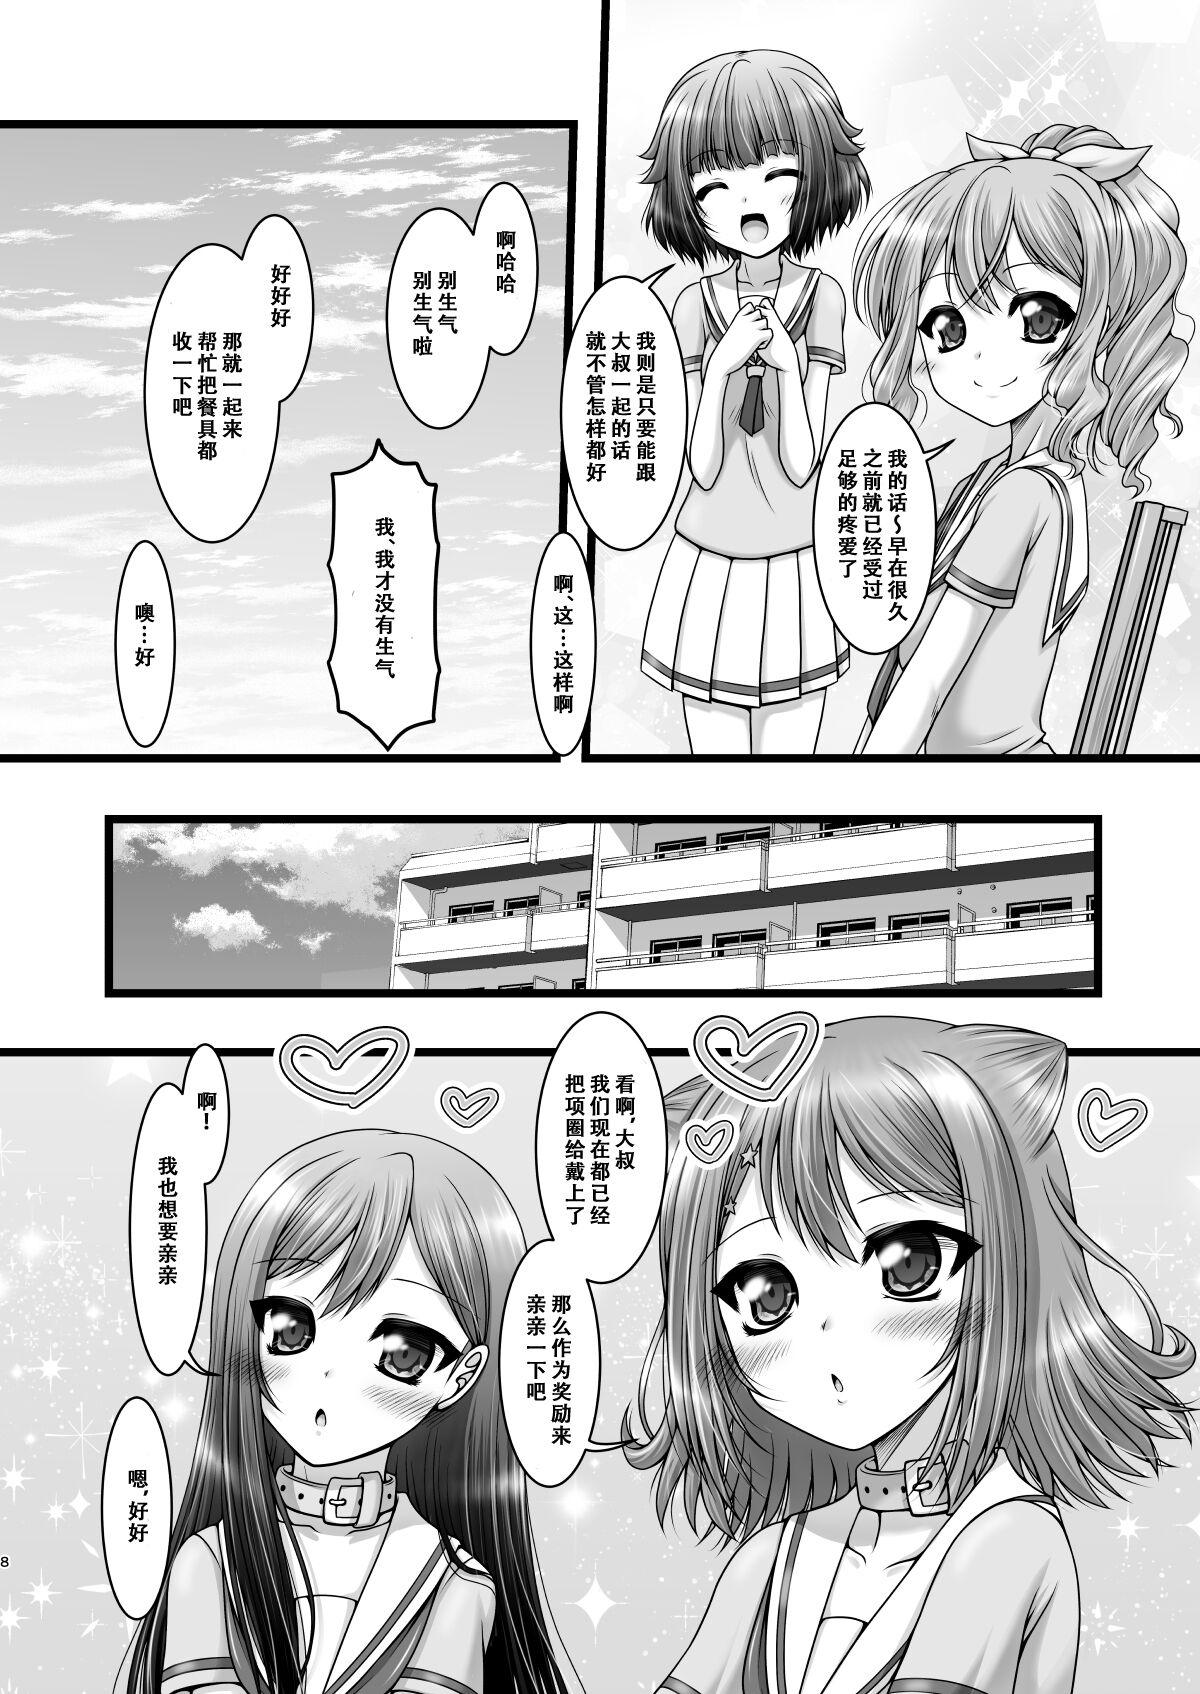 Massages Twinkle Express - Bang dream Jacking Off - Page 8